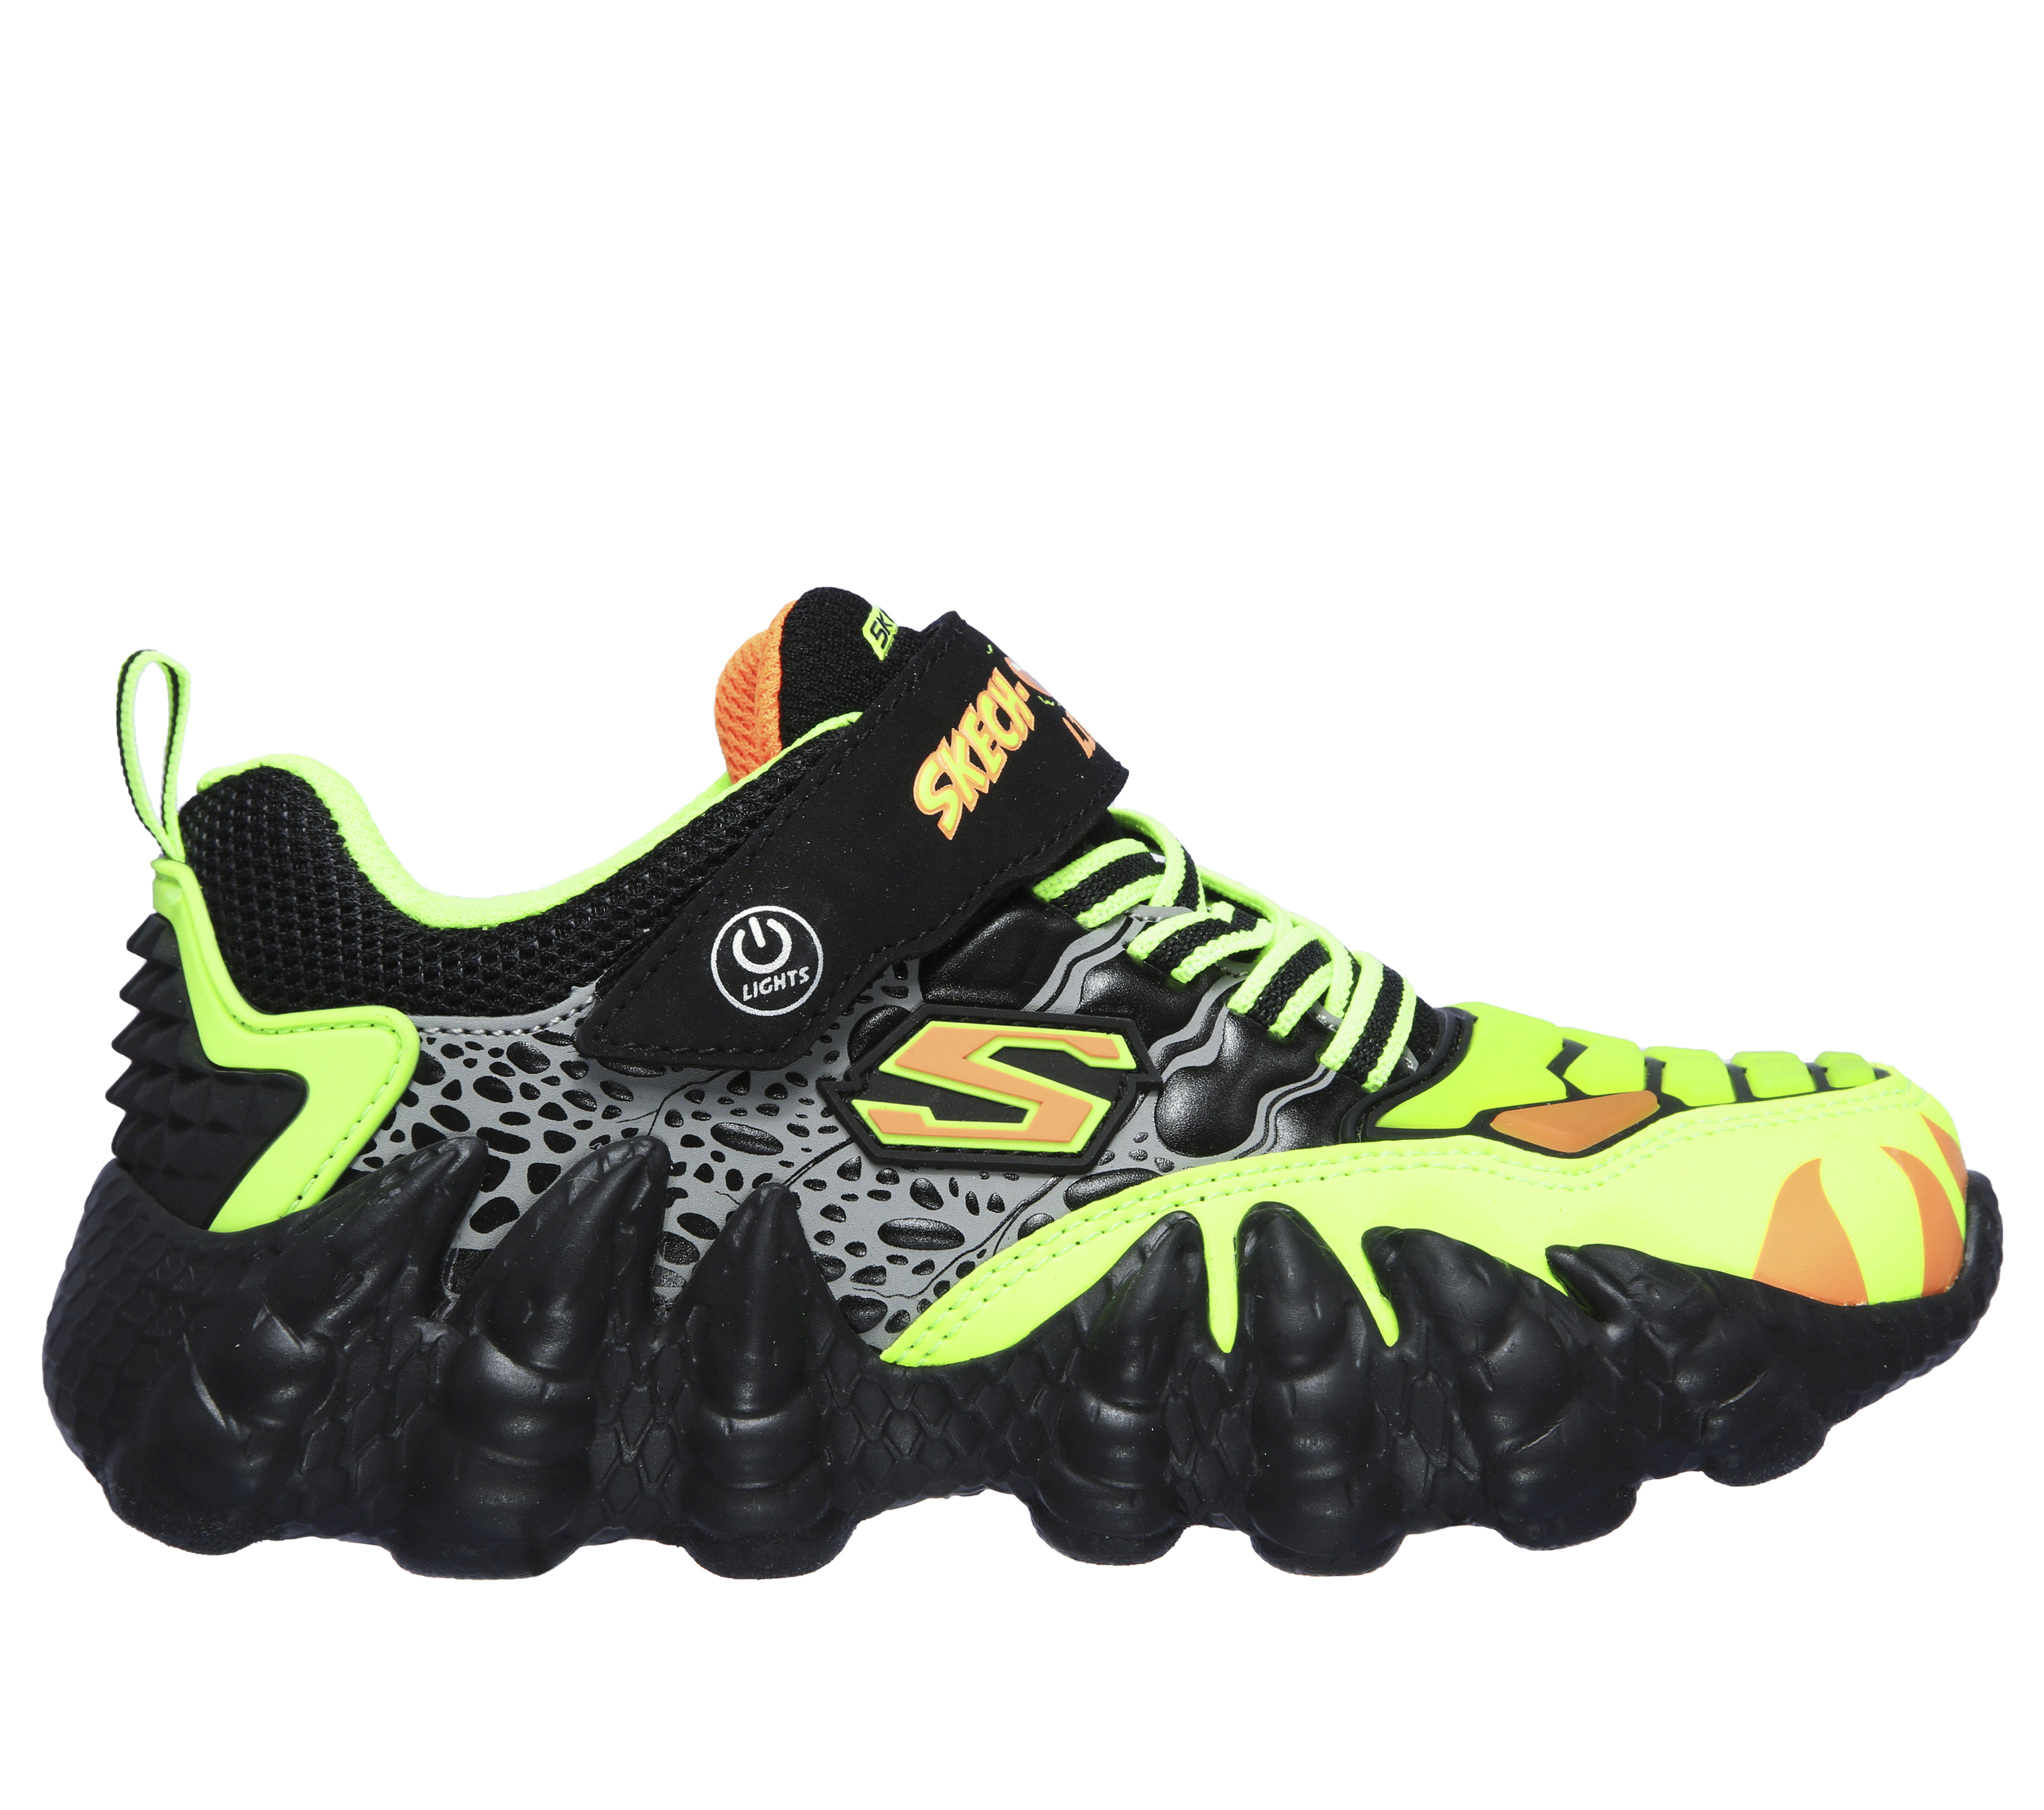 skechers light up shoes sale canada